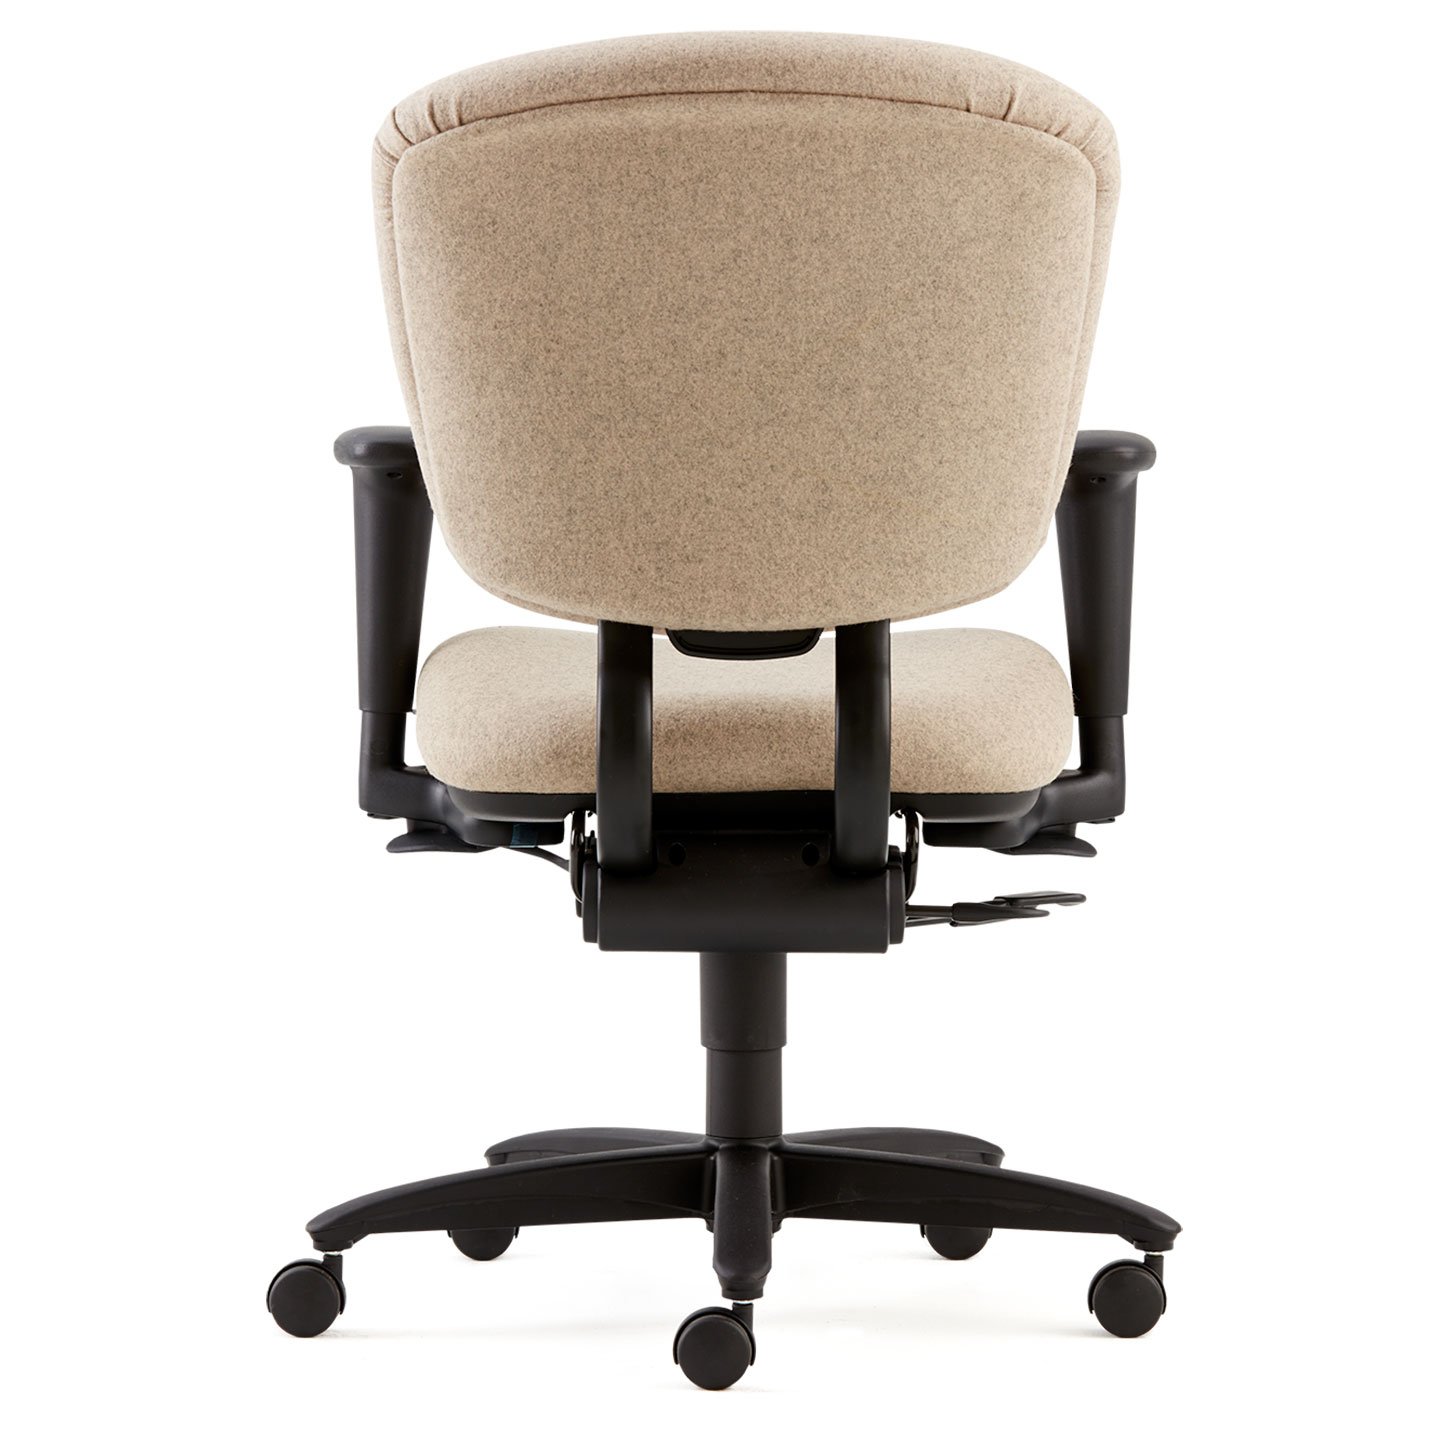 Haworth Improv H E desk chair in beige upholstery back view